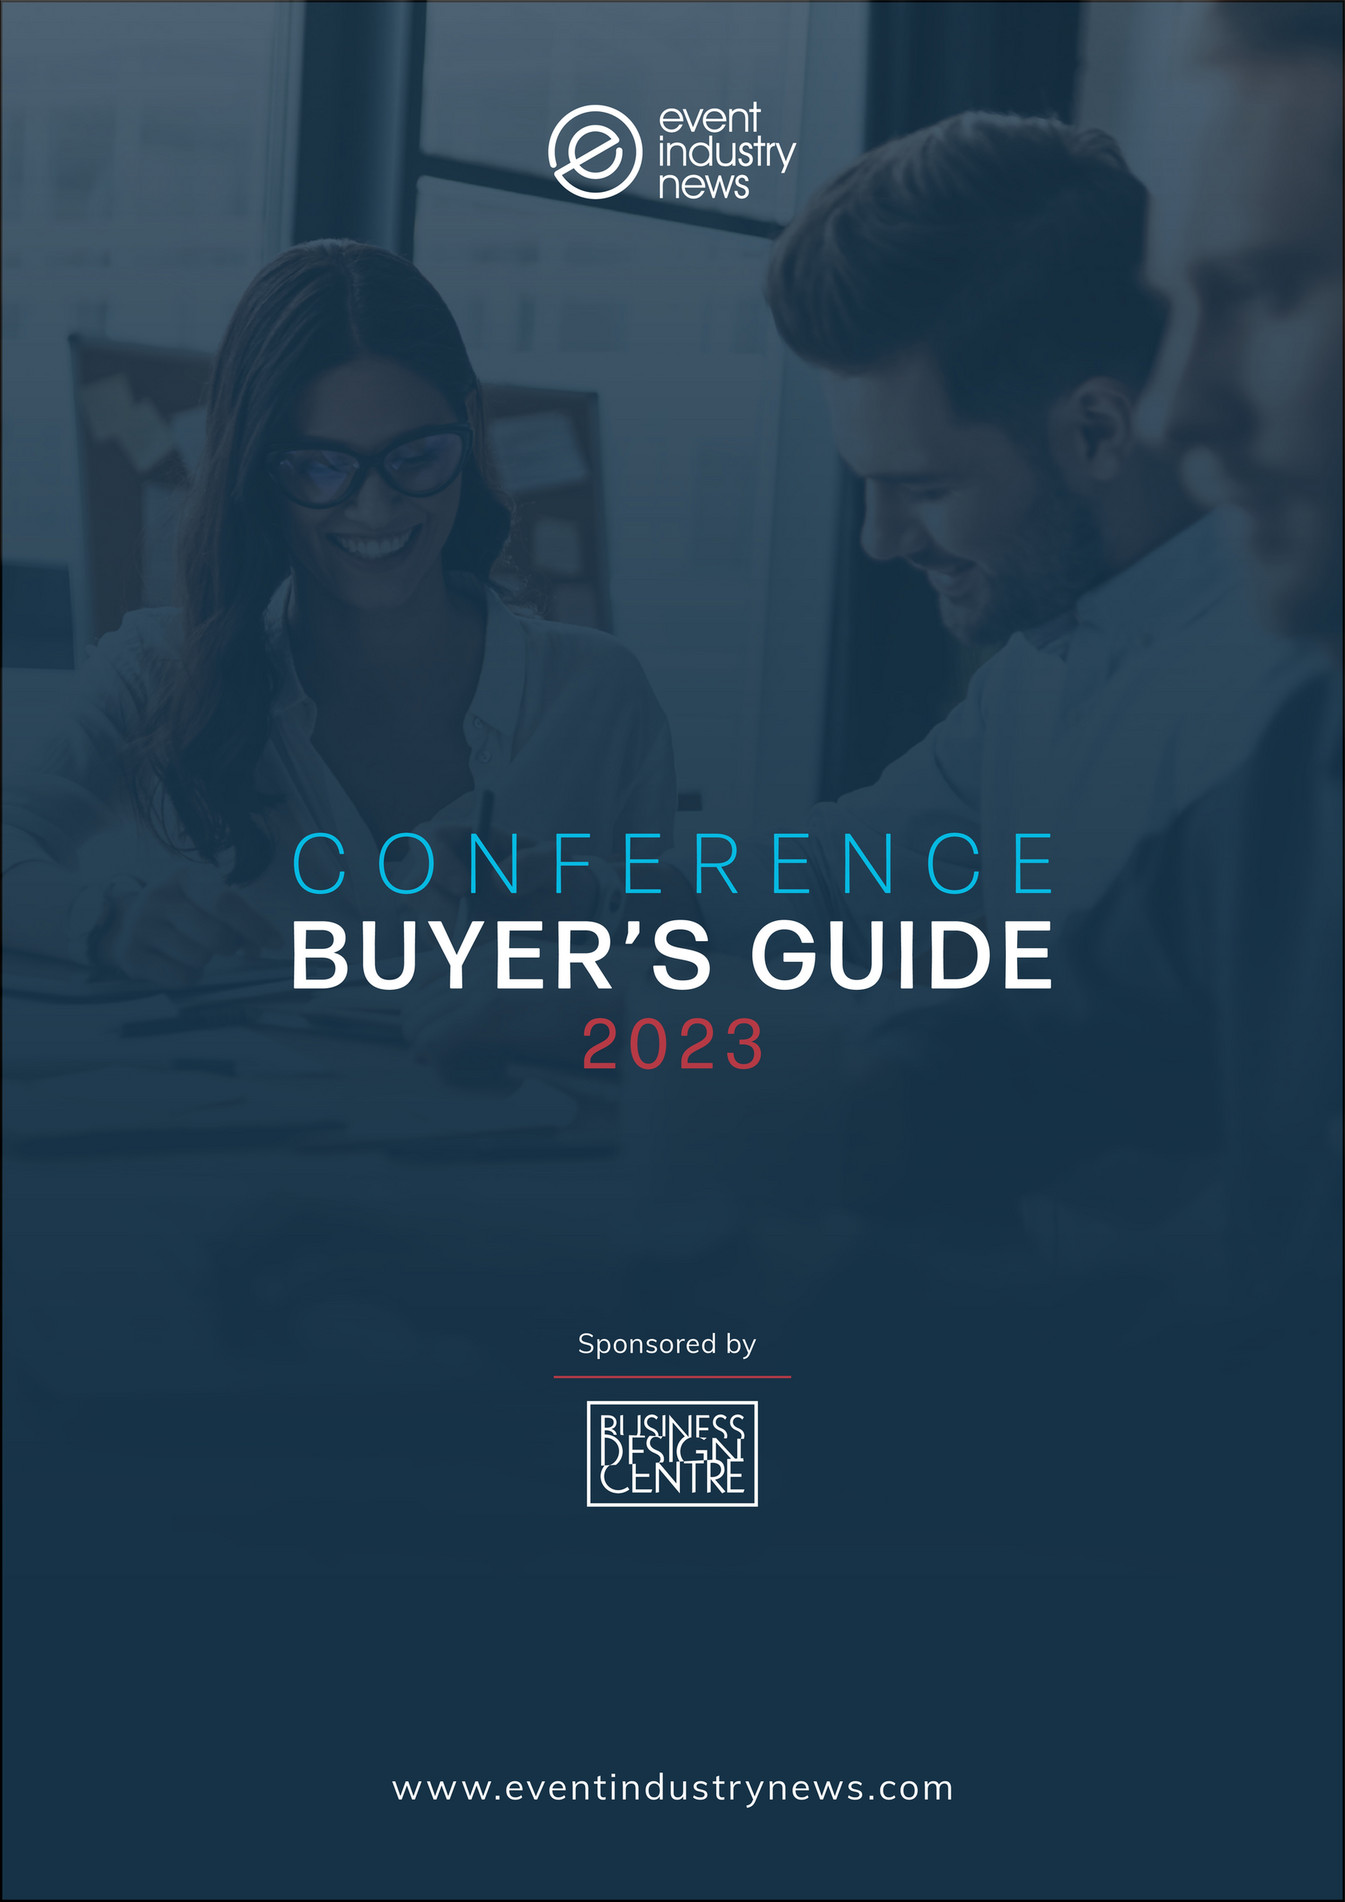 Event Industry News - The Conference Buyer's Guide - 2023 - Page 52-53 ...